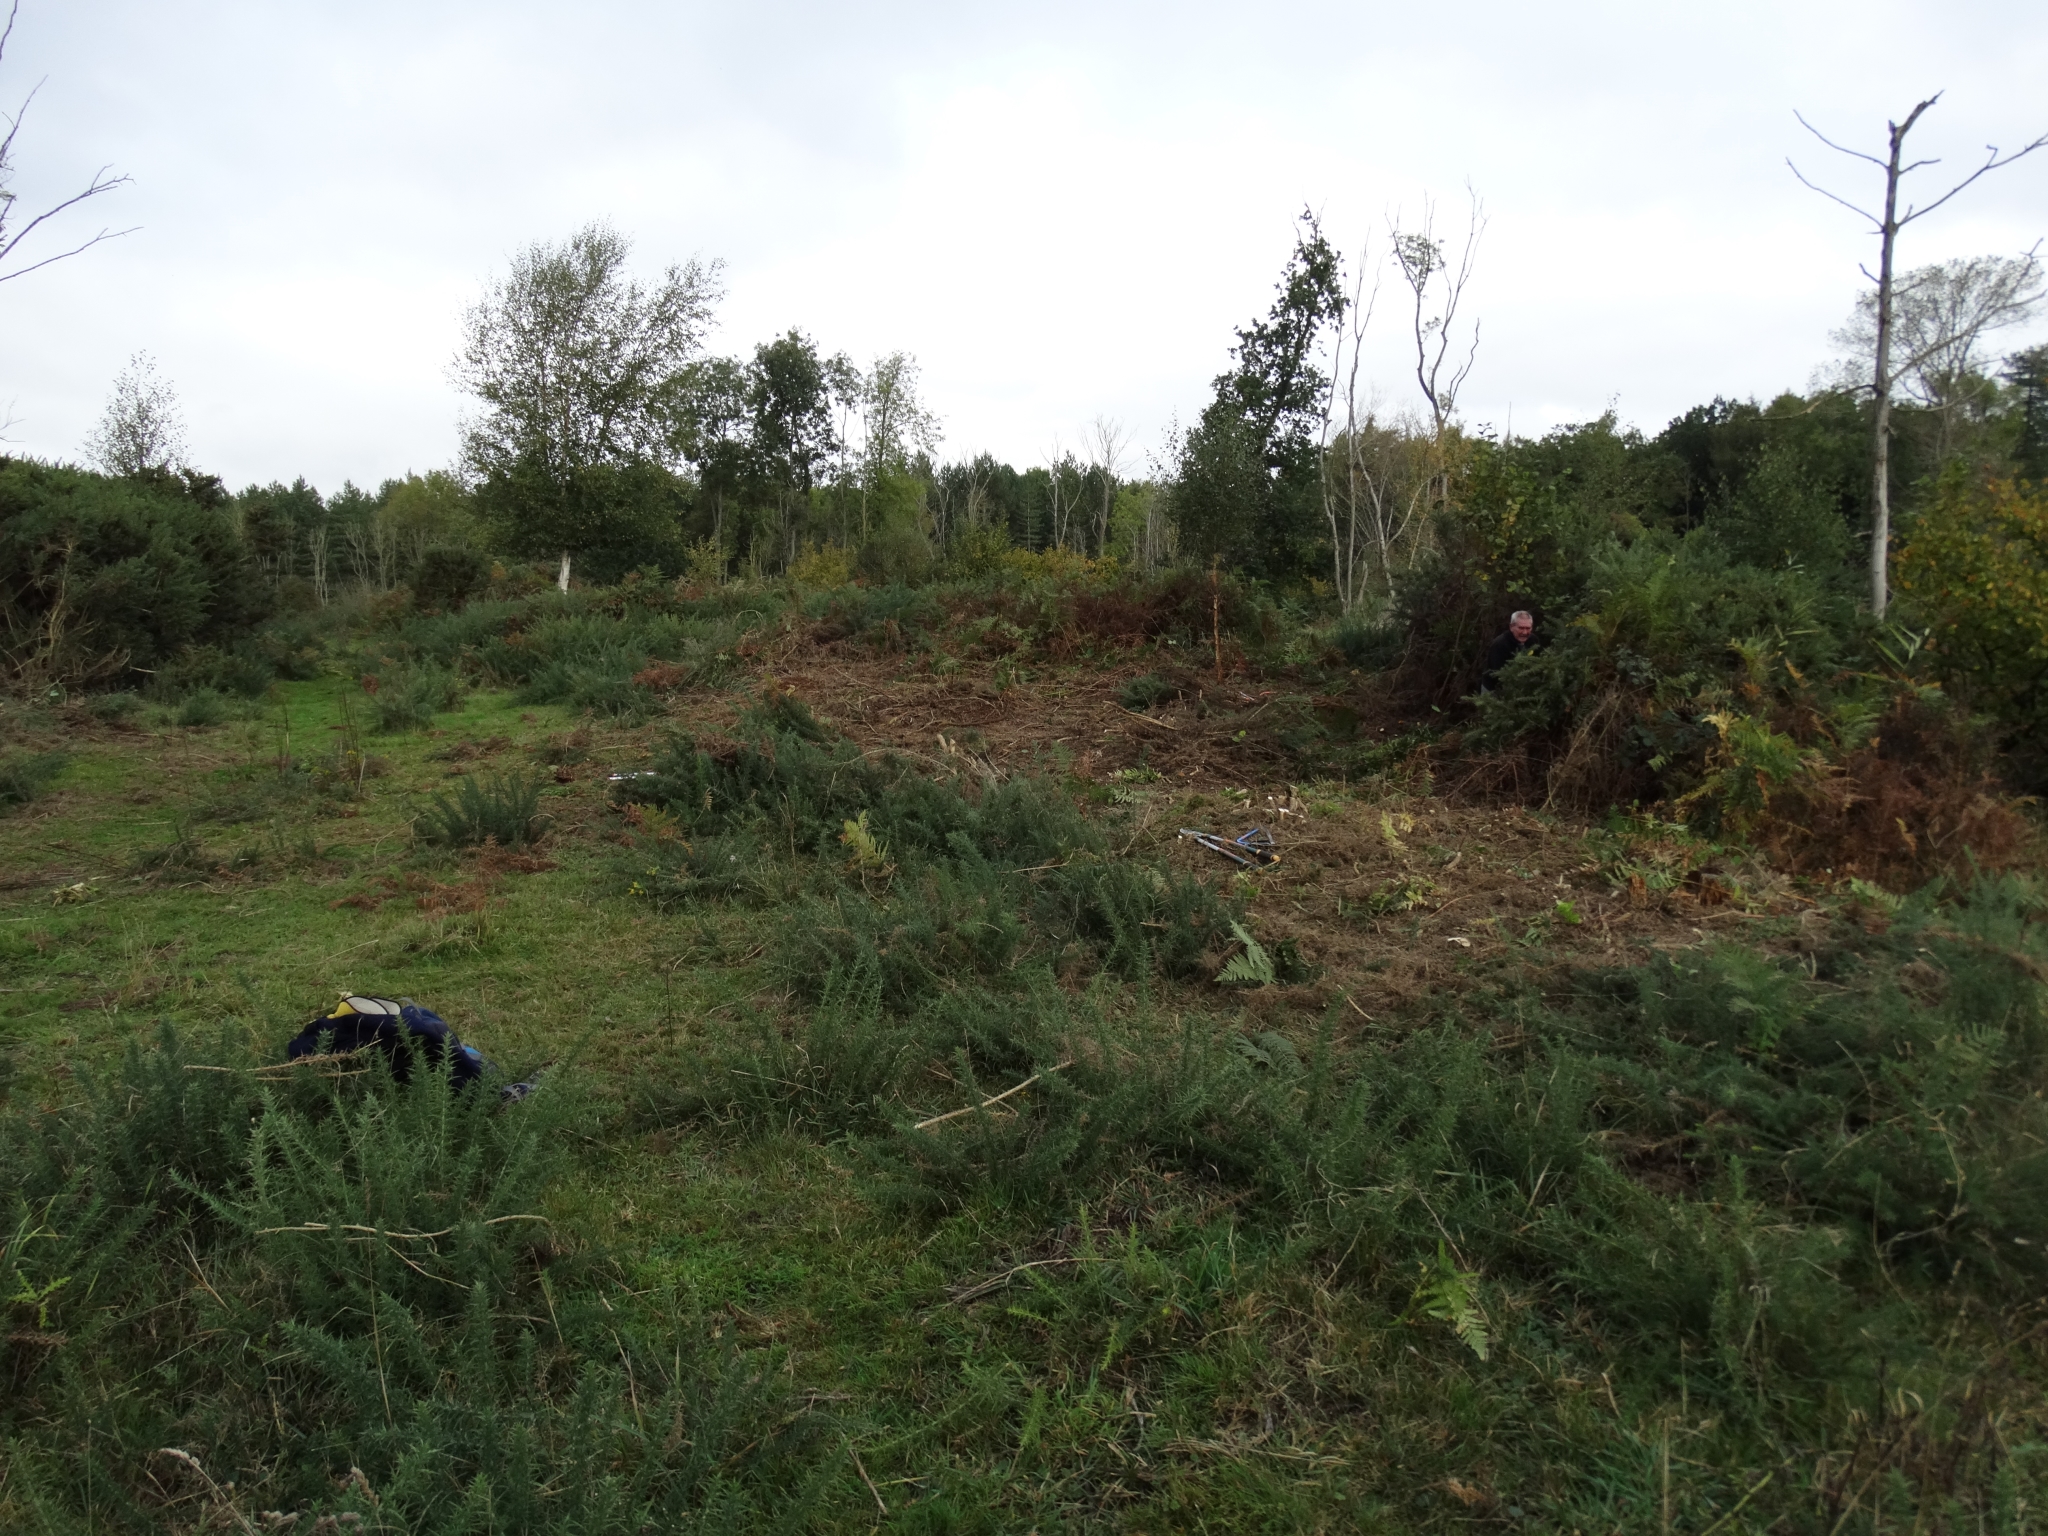 A photo from the FoTF Conservation Event - October 2019 - Gorse Clearance at Hockham Hills & Holes : A view across Hockham Hills and Holes